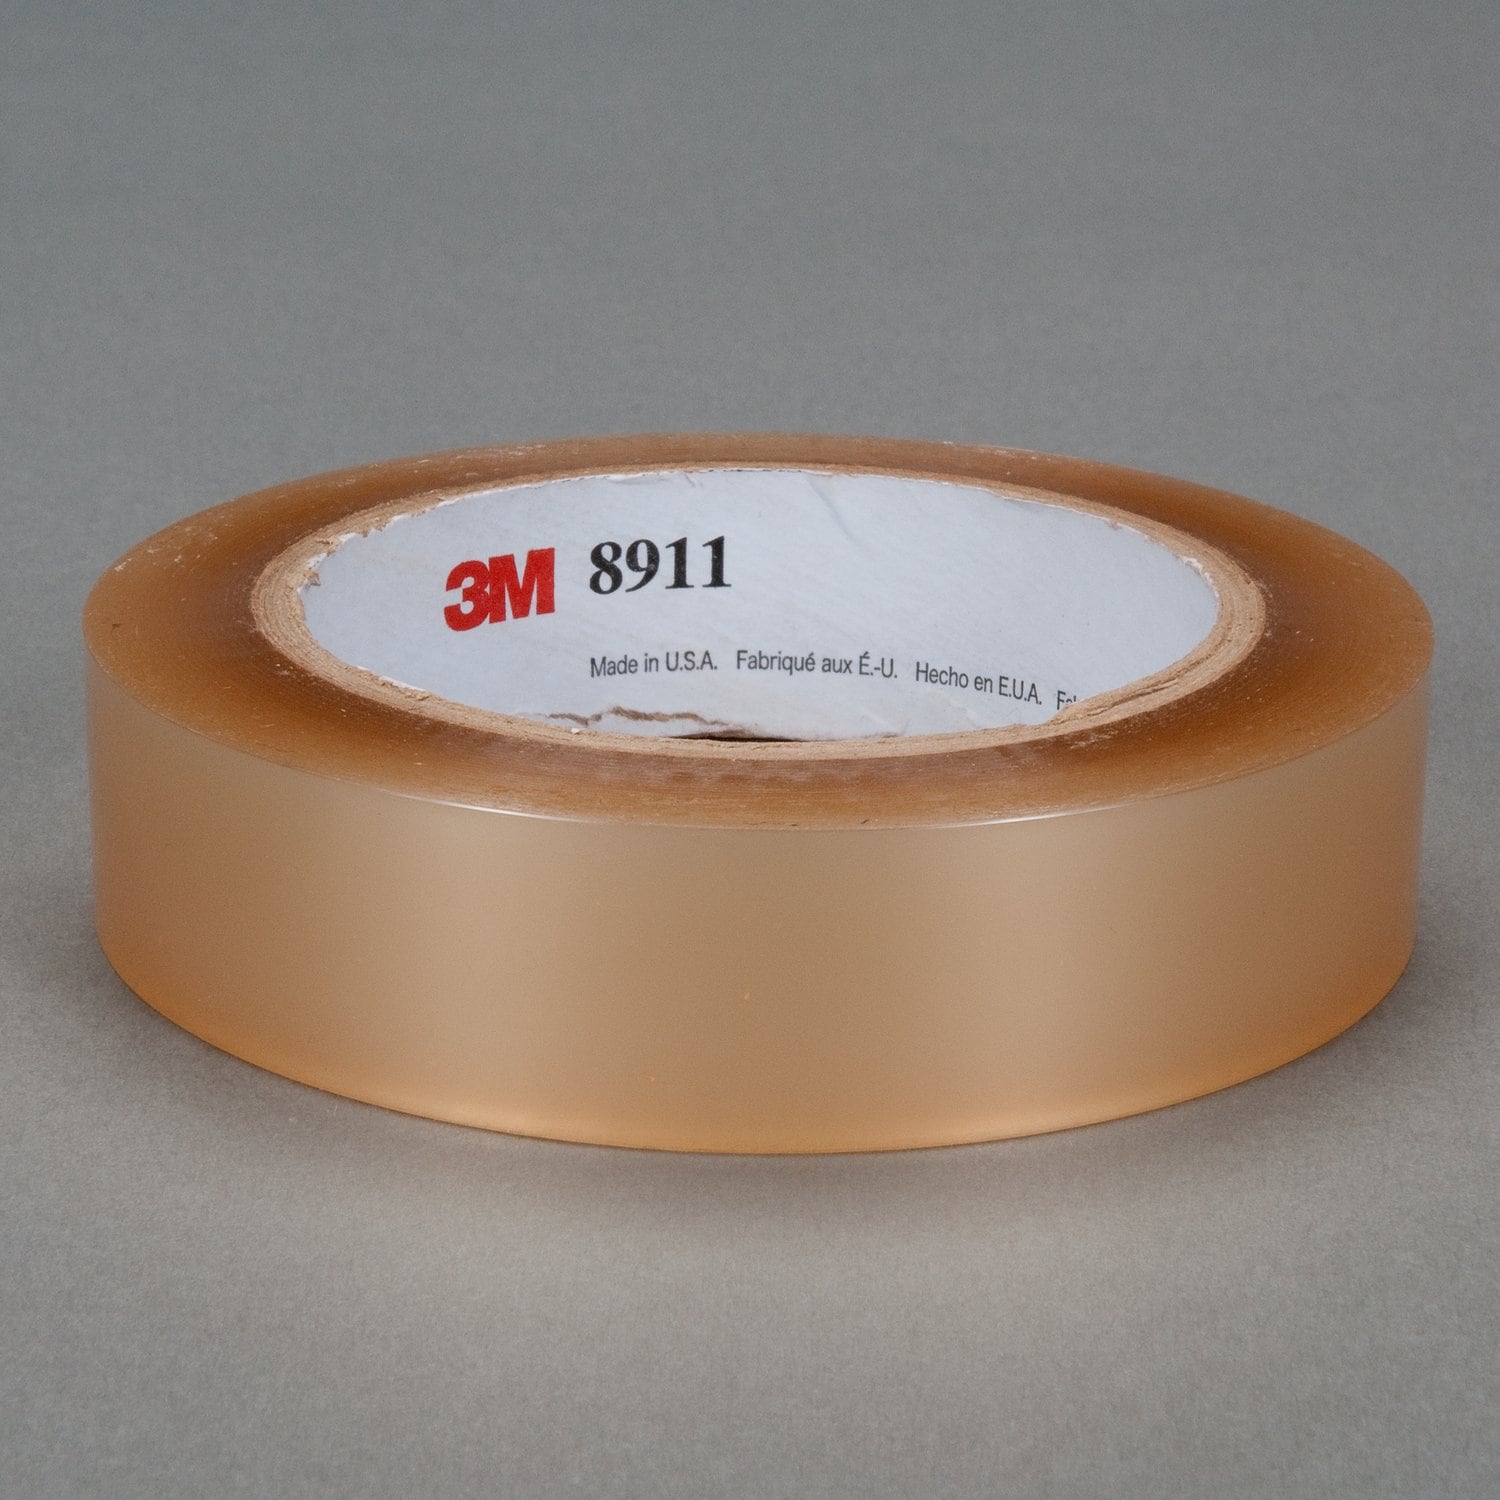 7100132957 - 3M Polyester Tape 8911, Transparent, 2.3 mil, Roll, Config